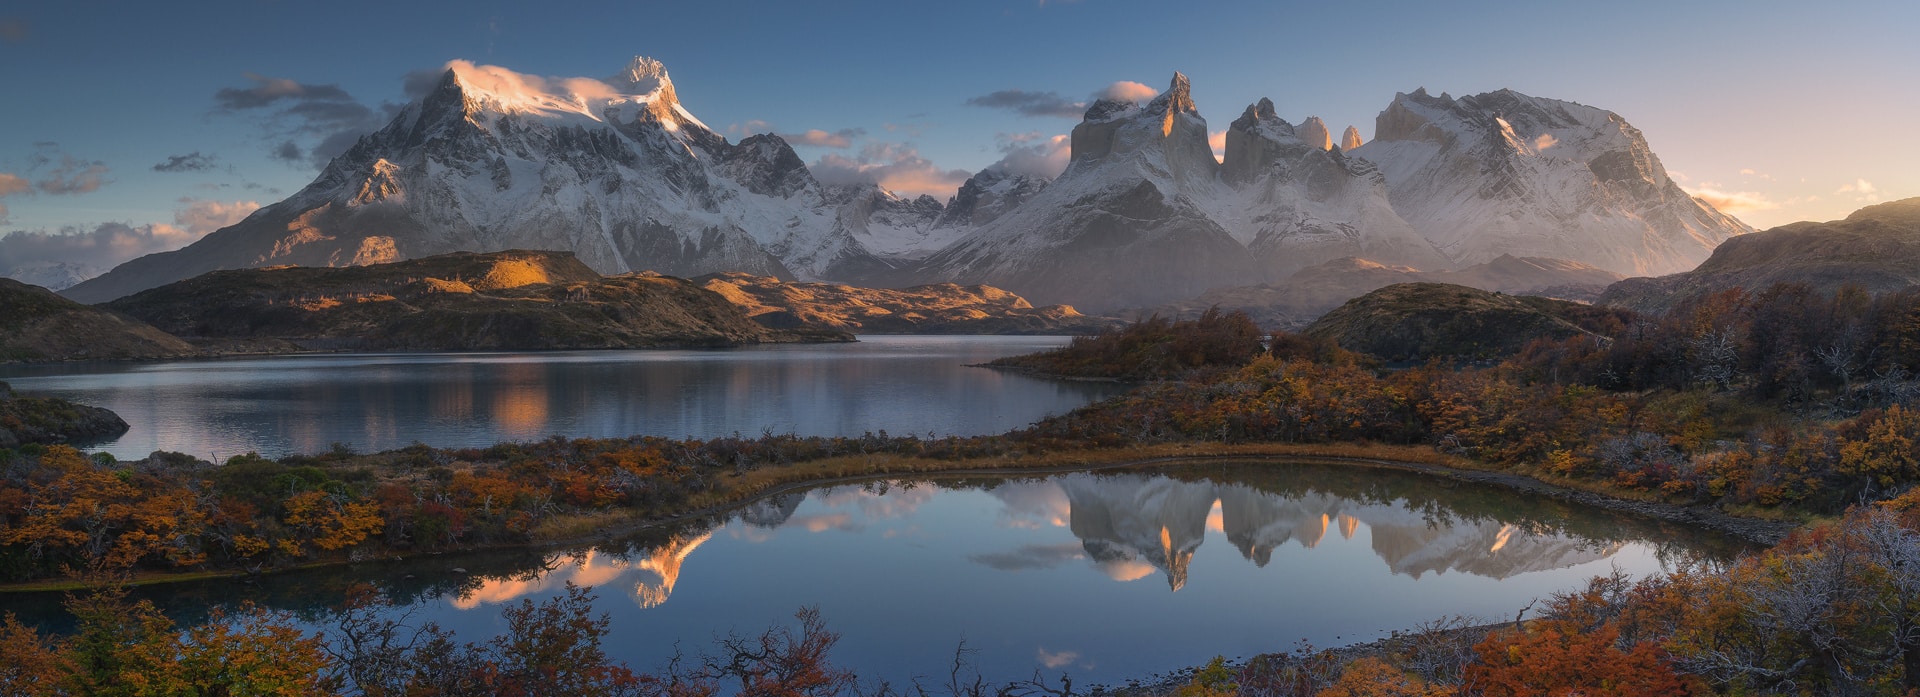 Enjoy Photography in Torres del Paine, Chile